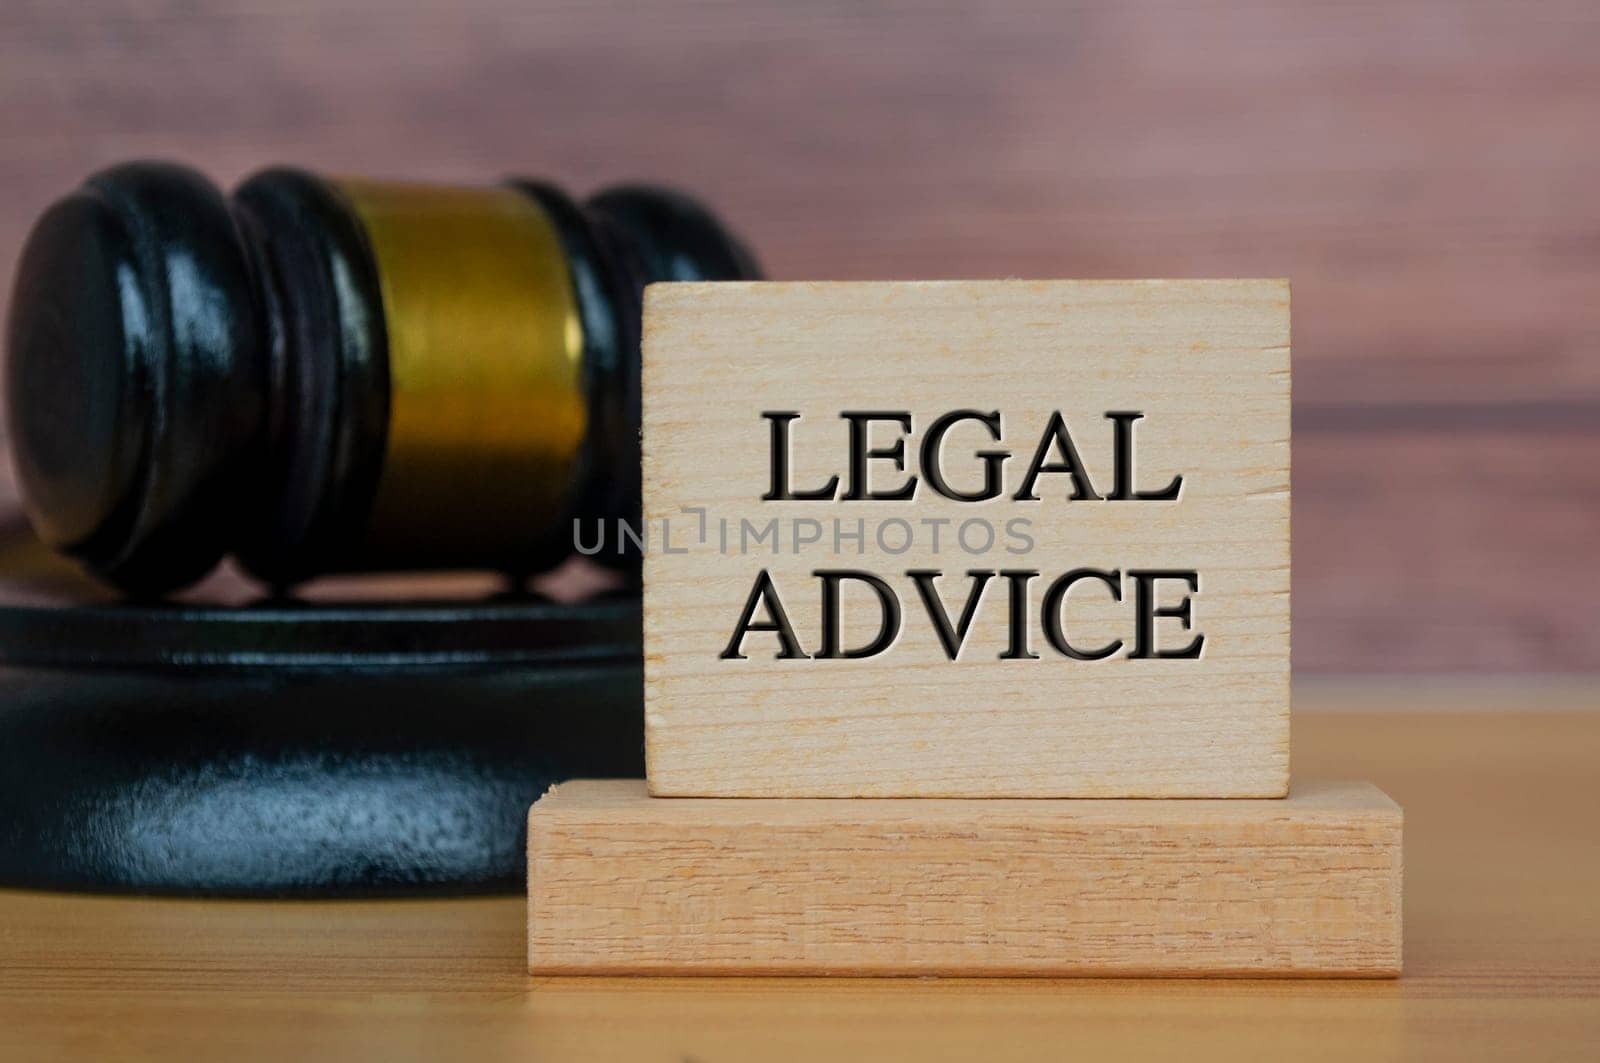 Legal advice text engraved on wooden block with gavel background. Legal and law concept